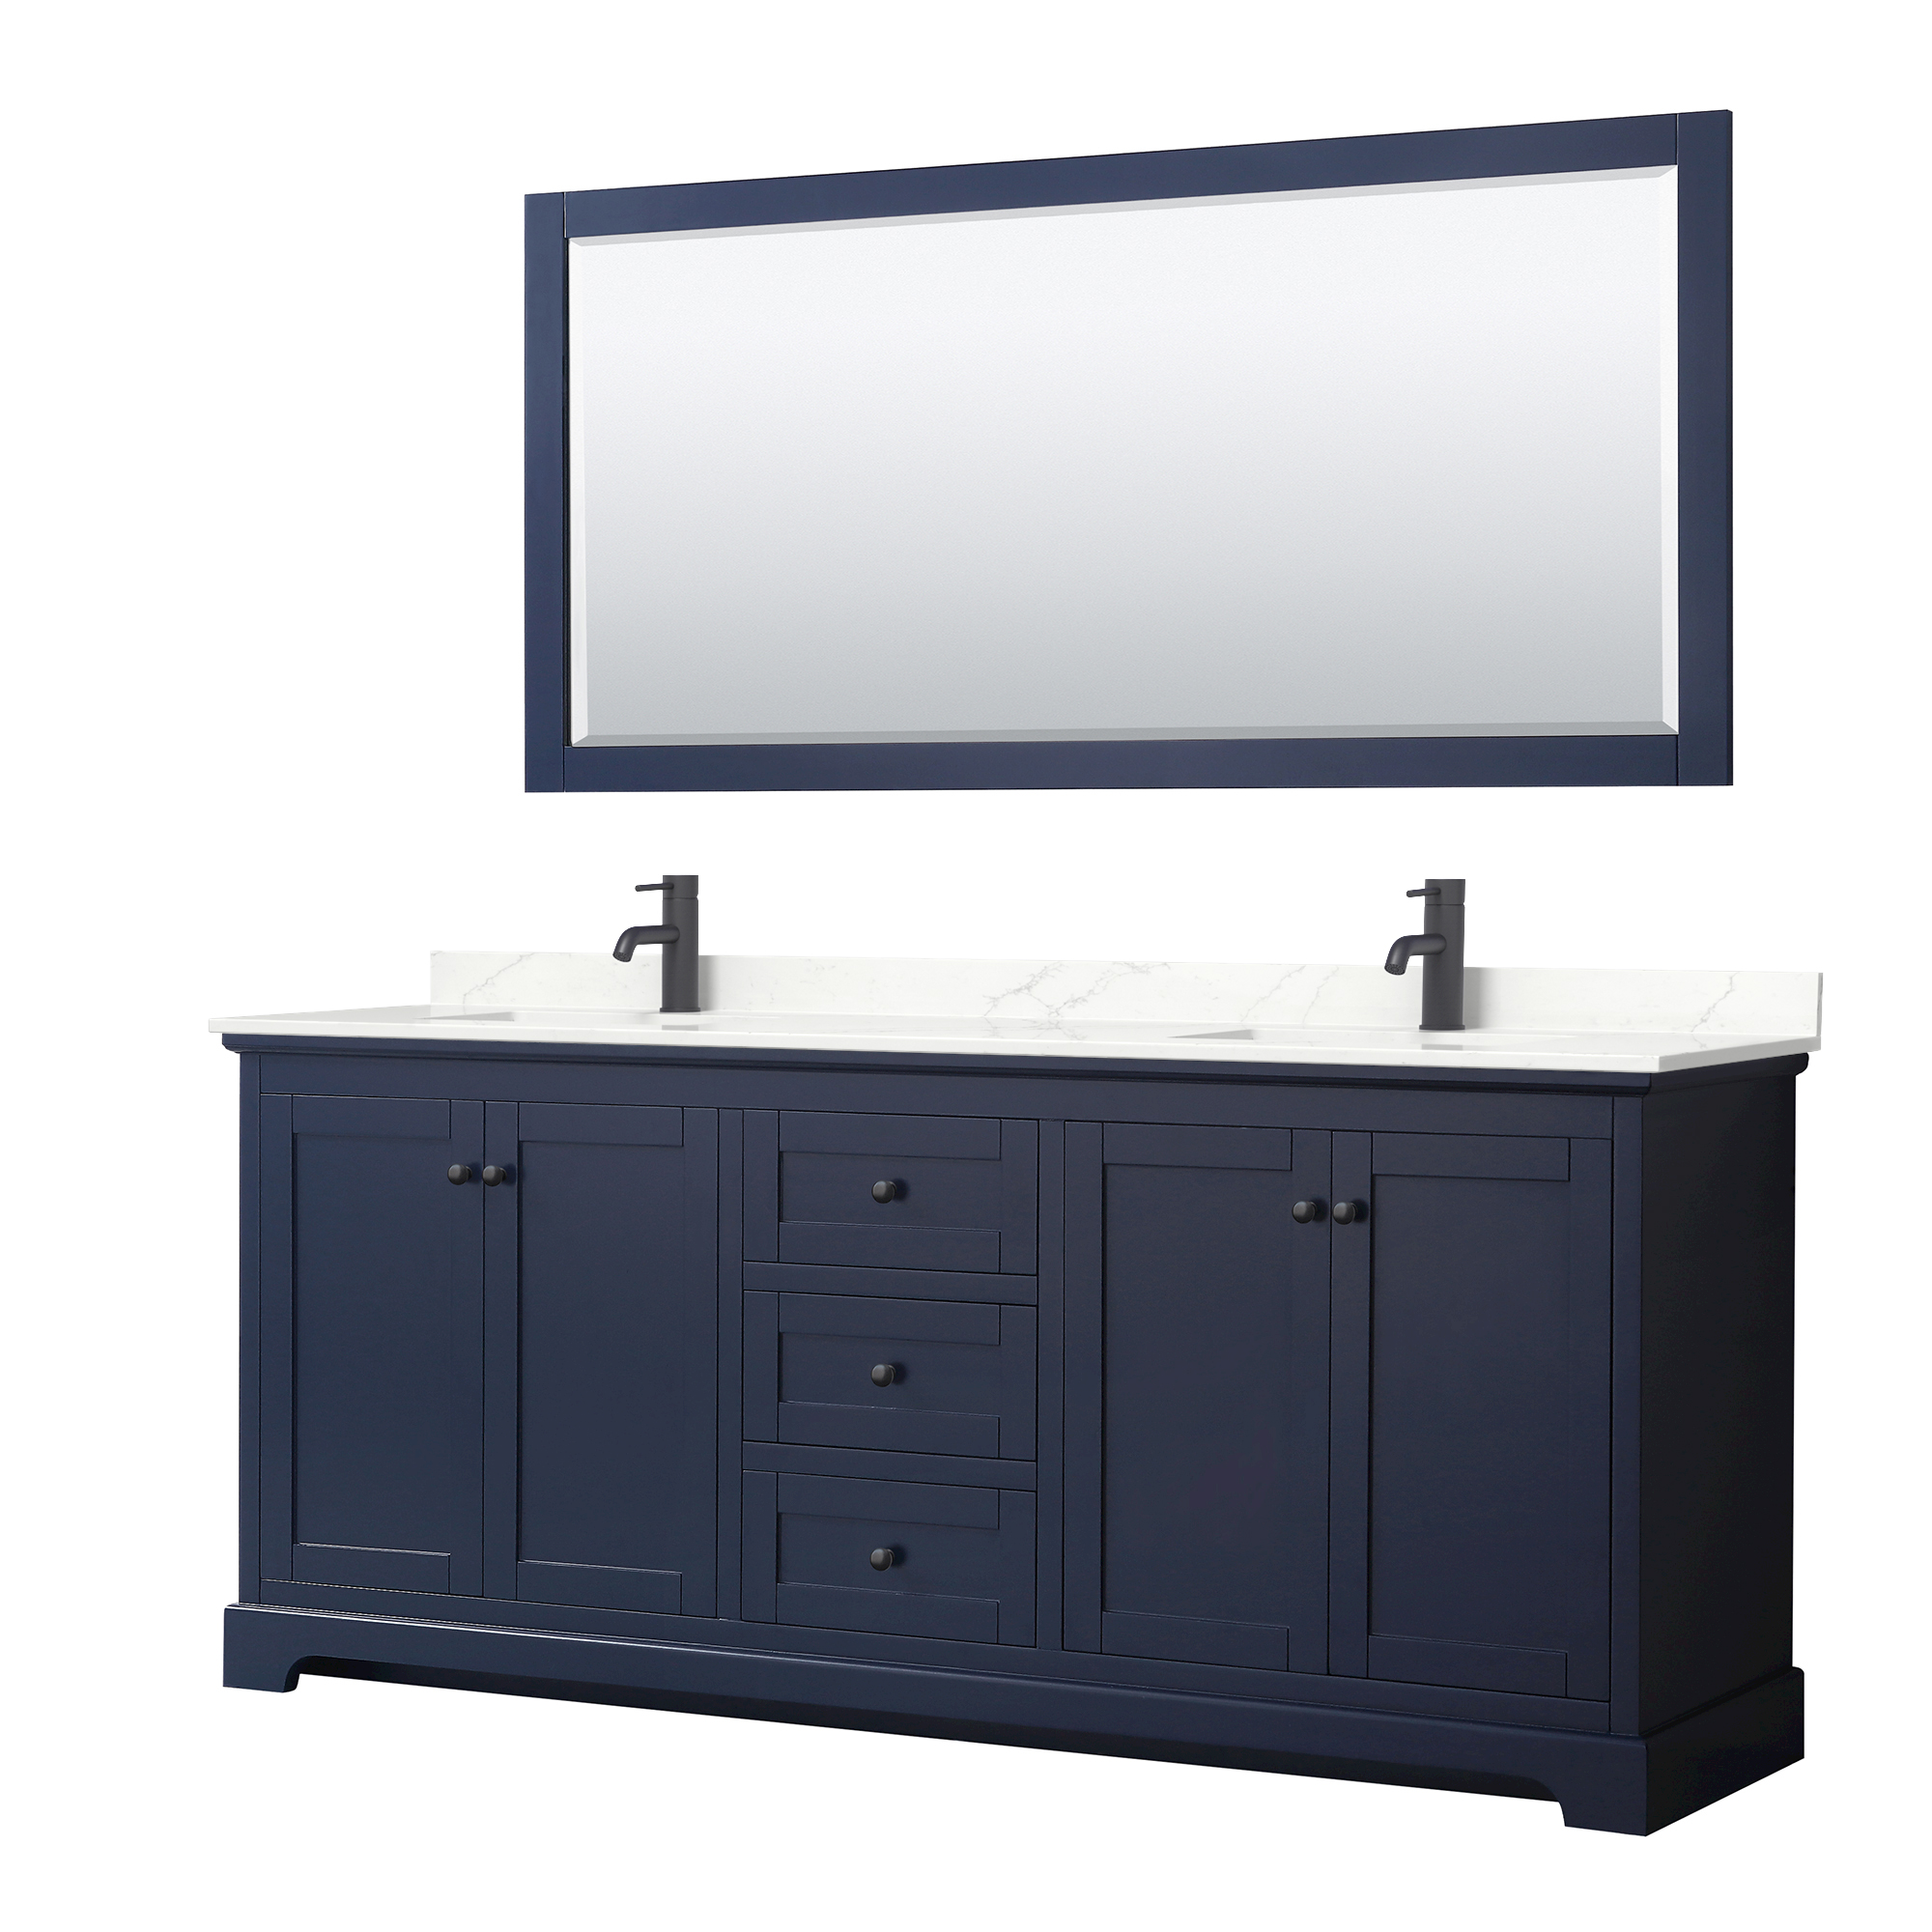 avery 80" double bathroom vanity by wyndham collection - dark blue